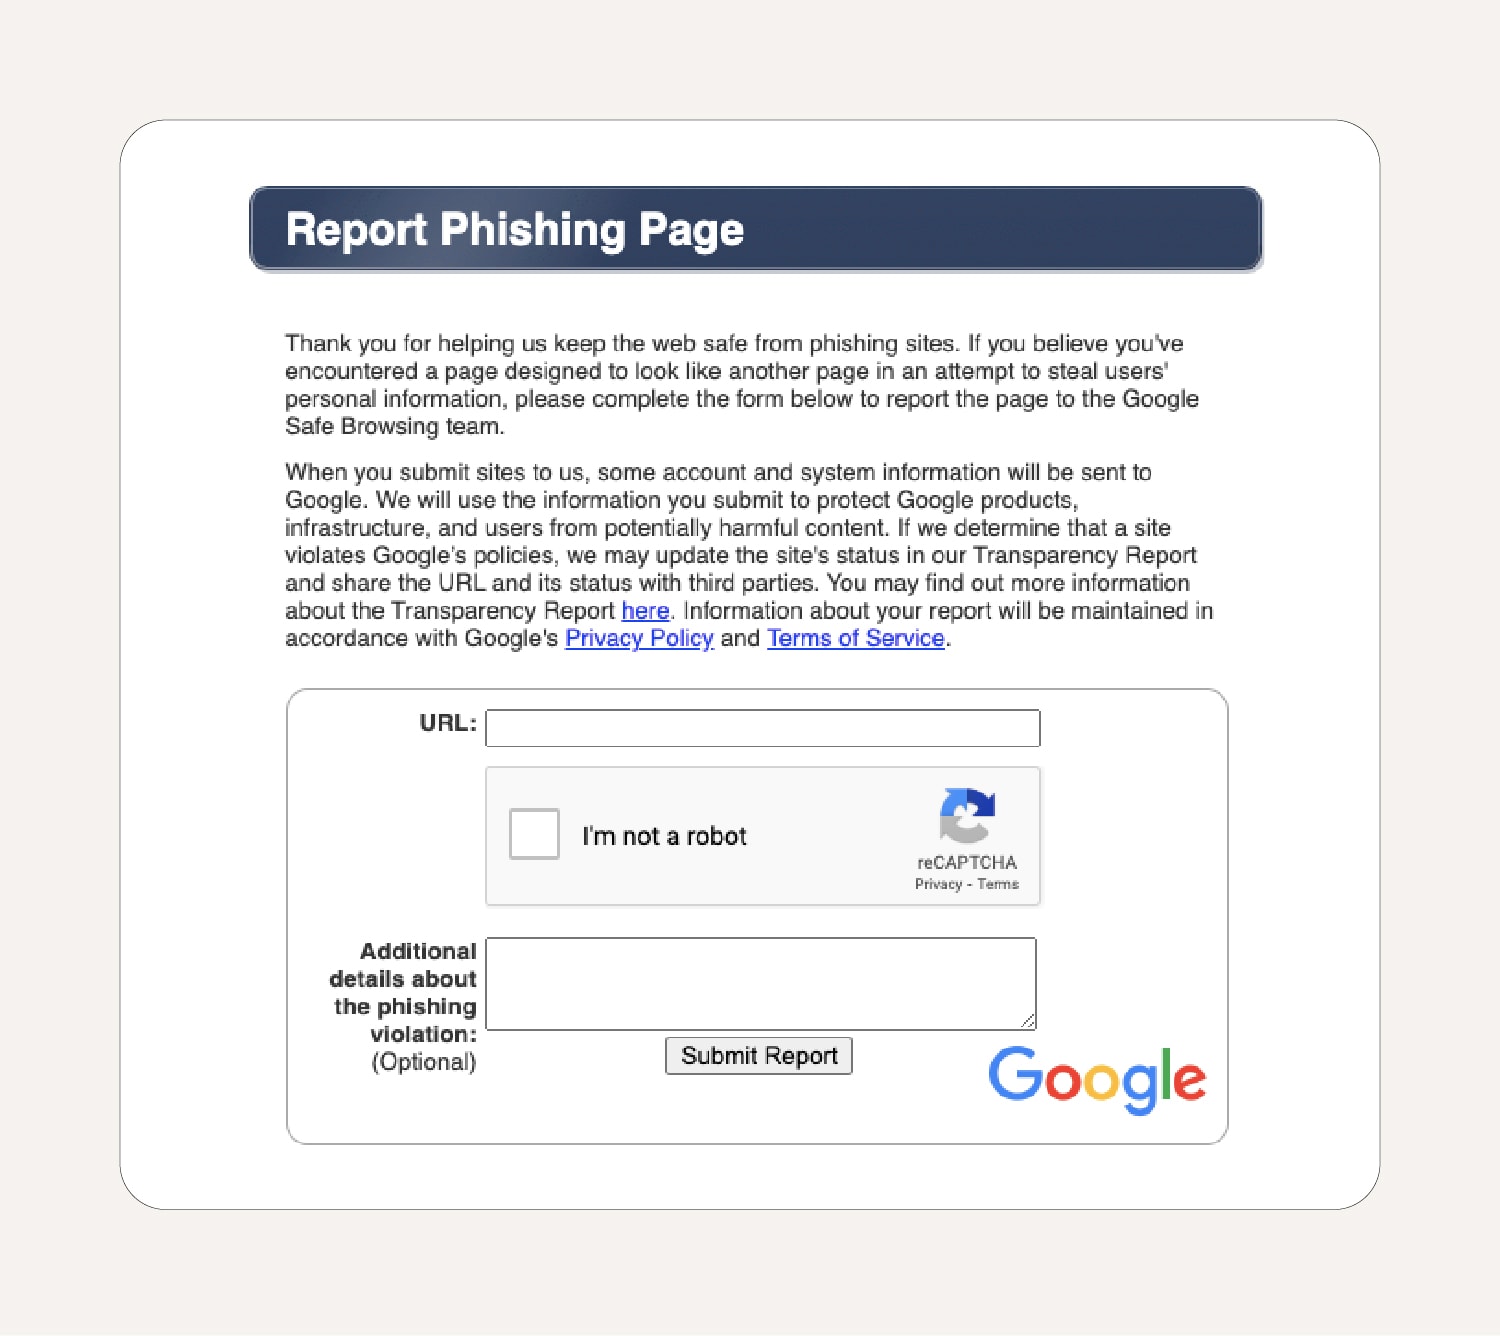 The submission form to report phishing websites to Google.